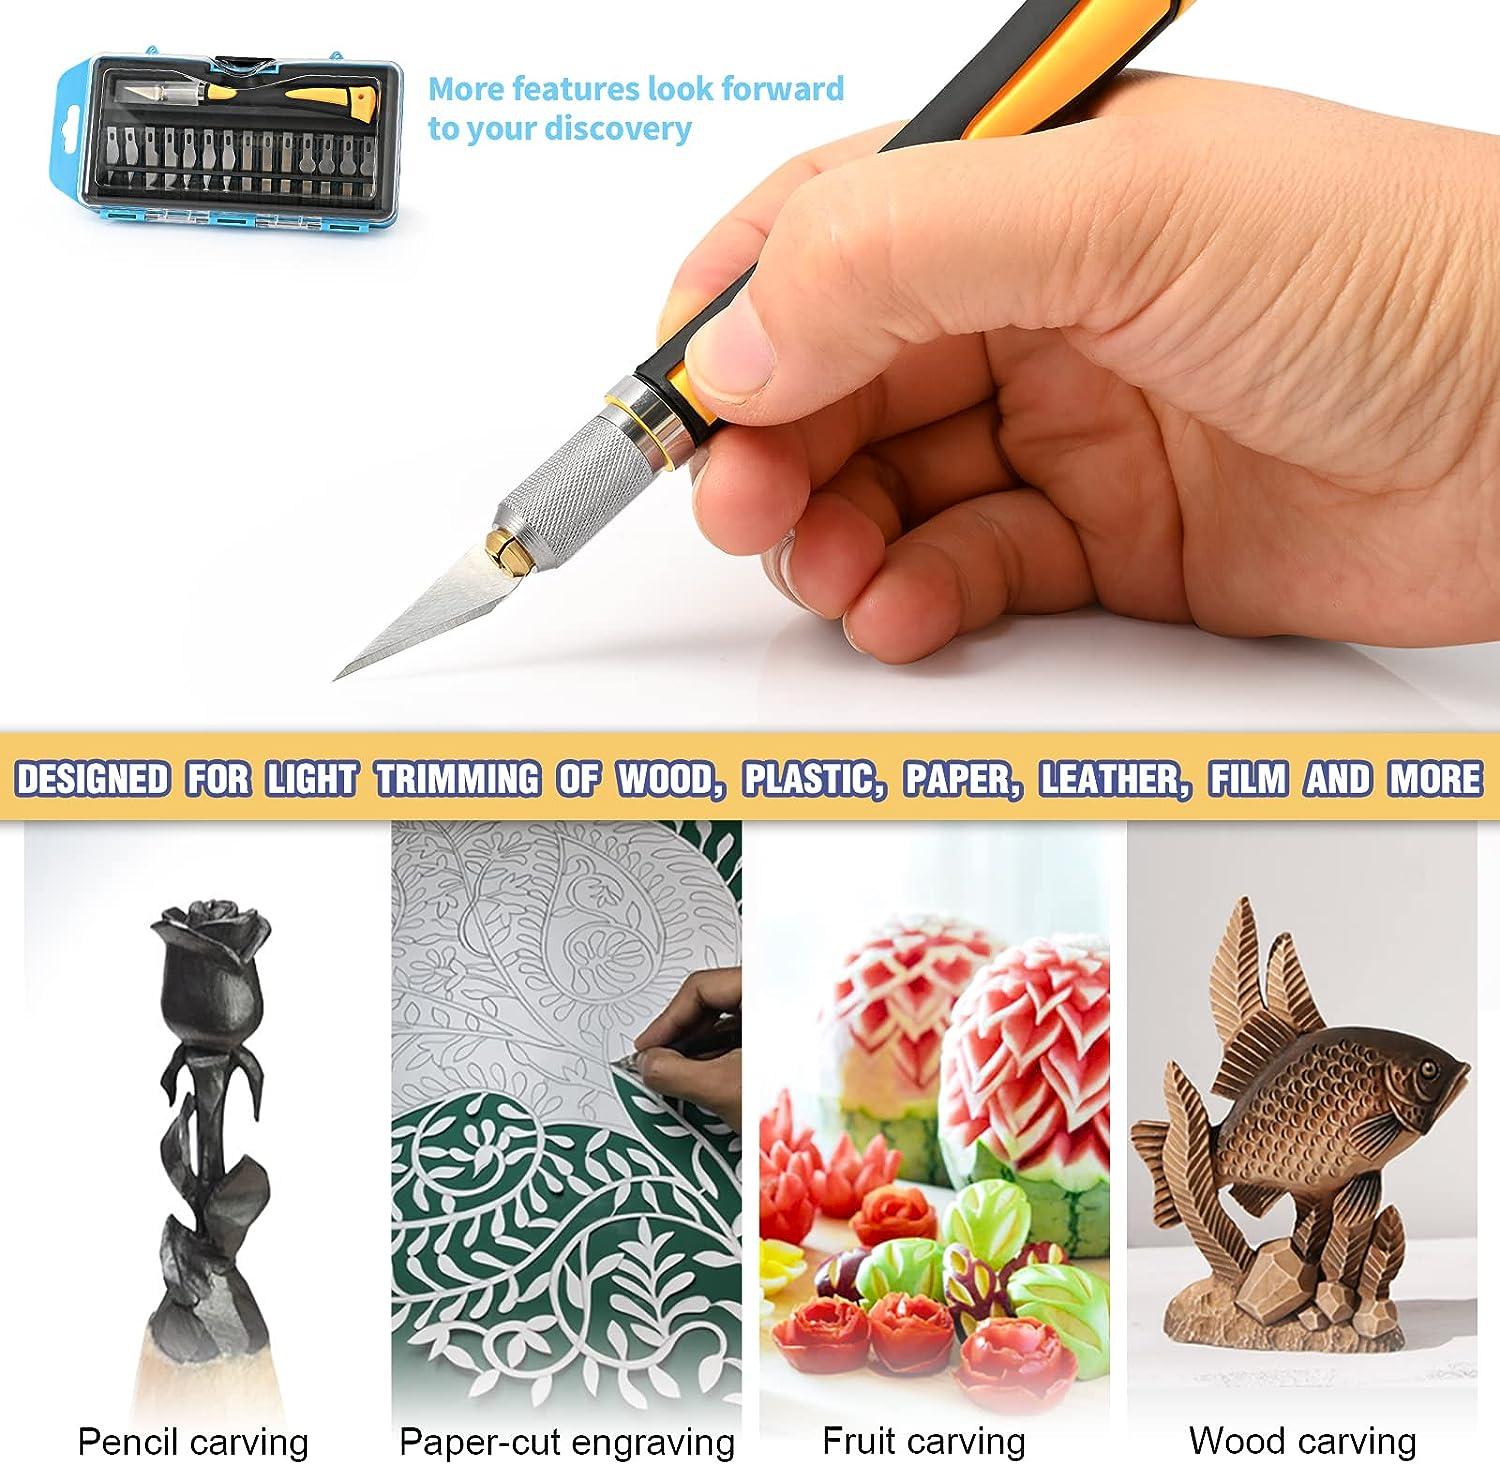 16 Piece Precision Craft Hobby Knife Kit, Utility Art Exacto Knife Sets,  Sharp Razor Knives Tool for Carving, Architecture Modeling, Scrapbooking,  Sculpture, Wood Working-Stencil, DIY Art Work Cutting - Coupon Codes, Promo